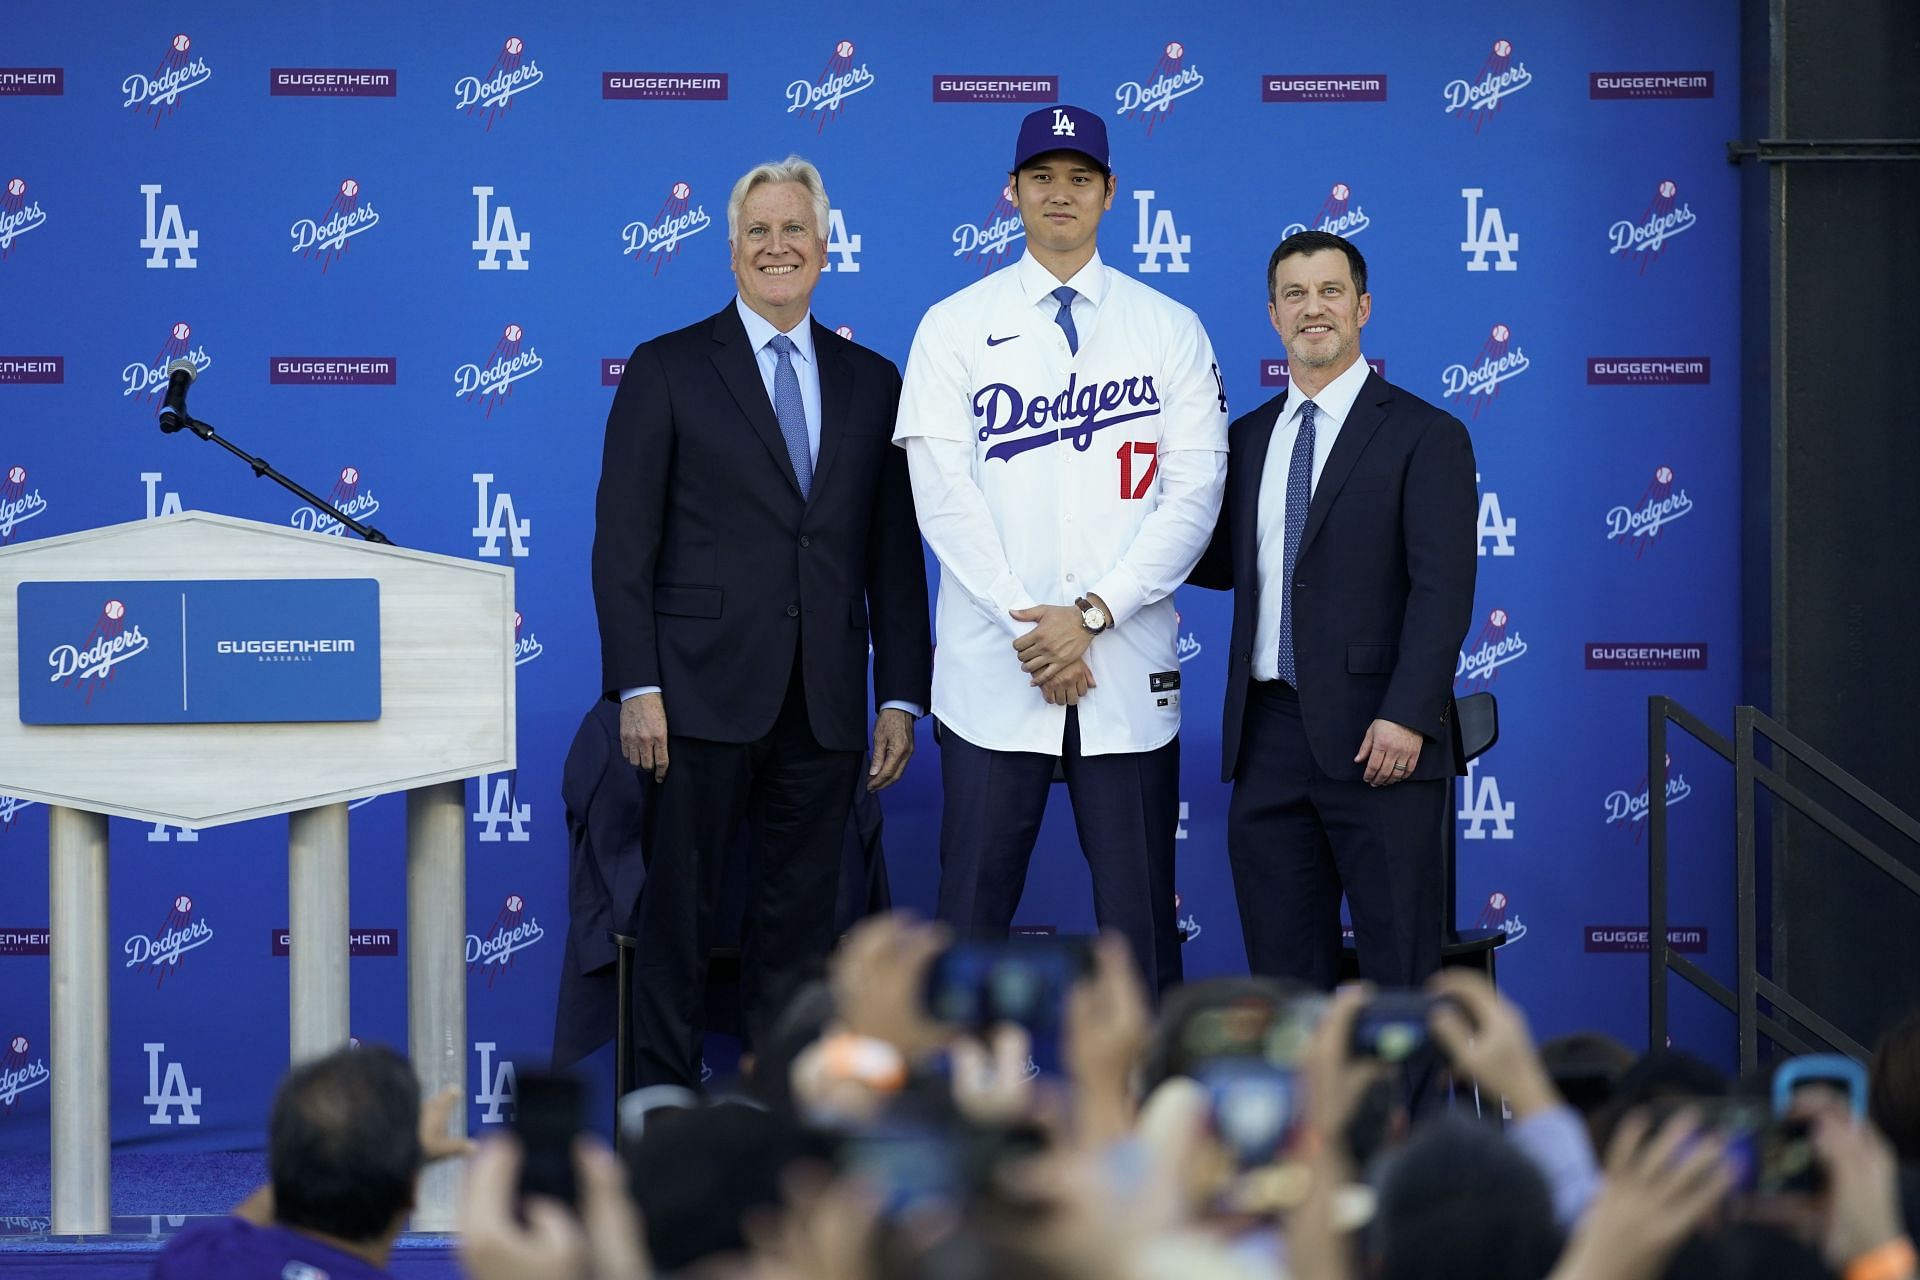 Shohei Ohtani signed with the Dodgers